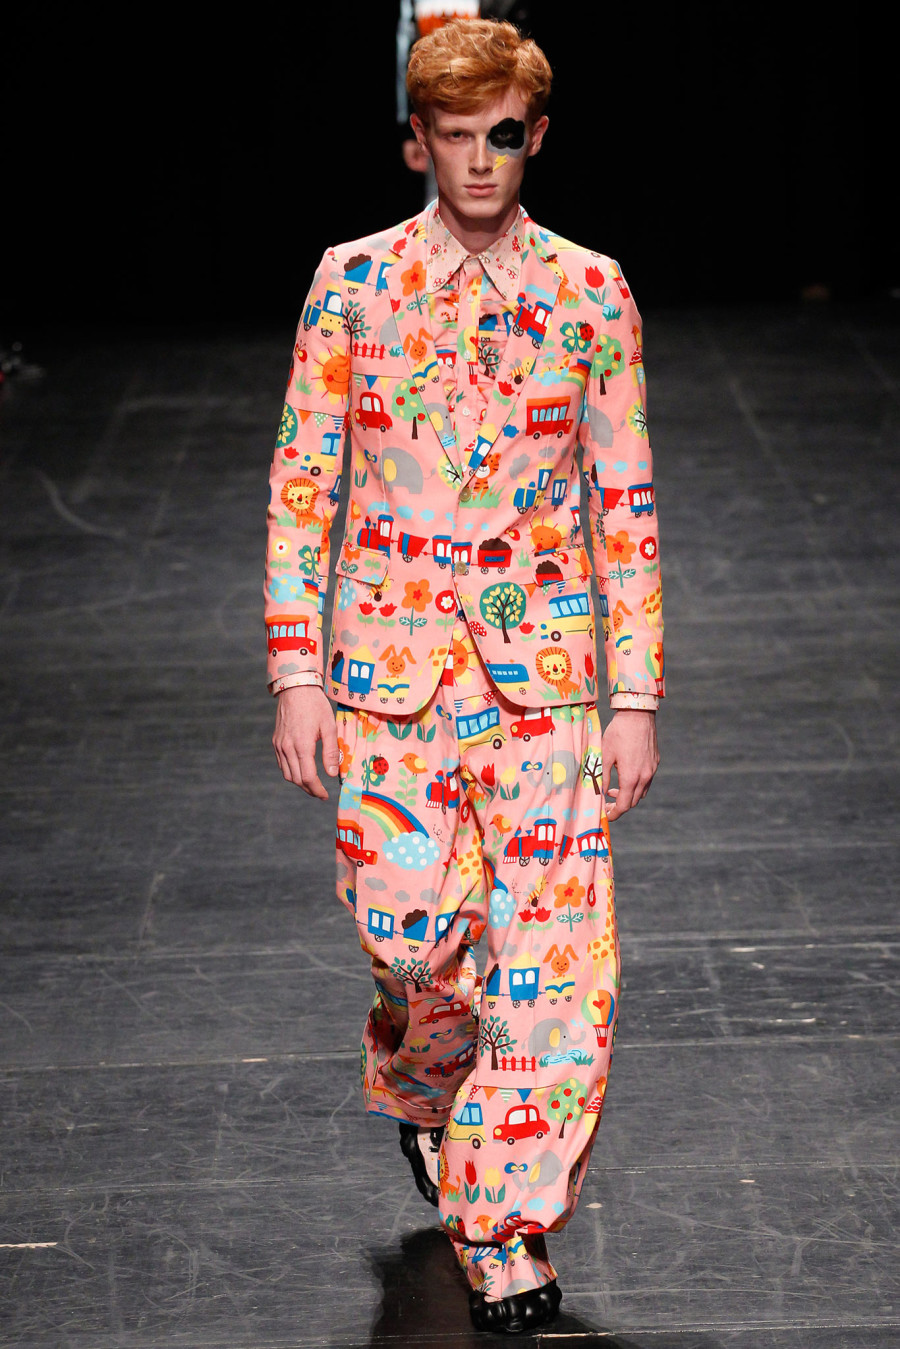 Top Trends From Men's Fashion Week - style etcetera